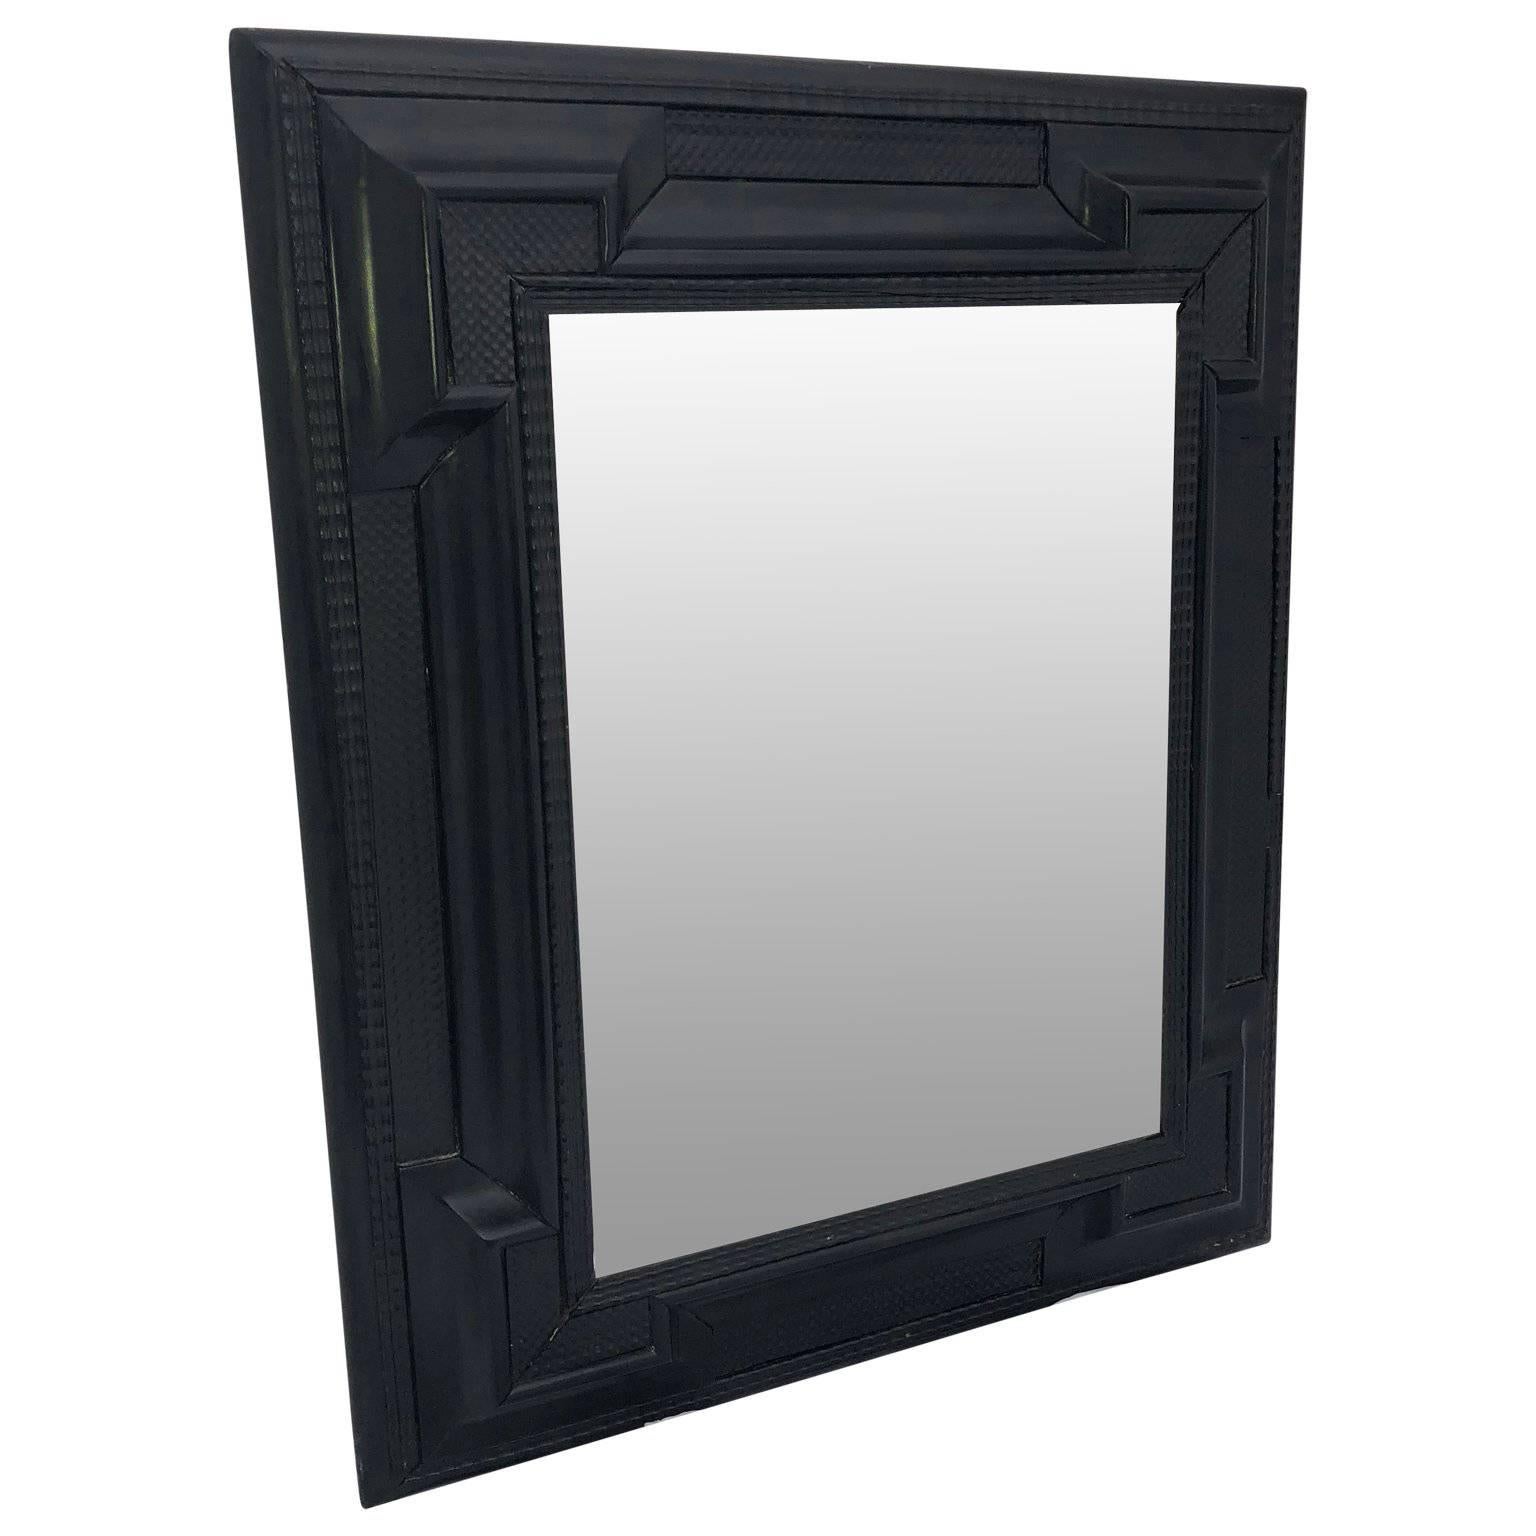 Early Flemish Or Scandinavian Baroque Style Wall Mirror